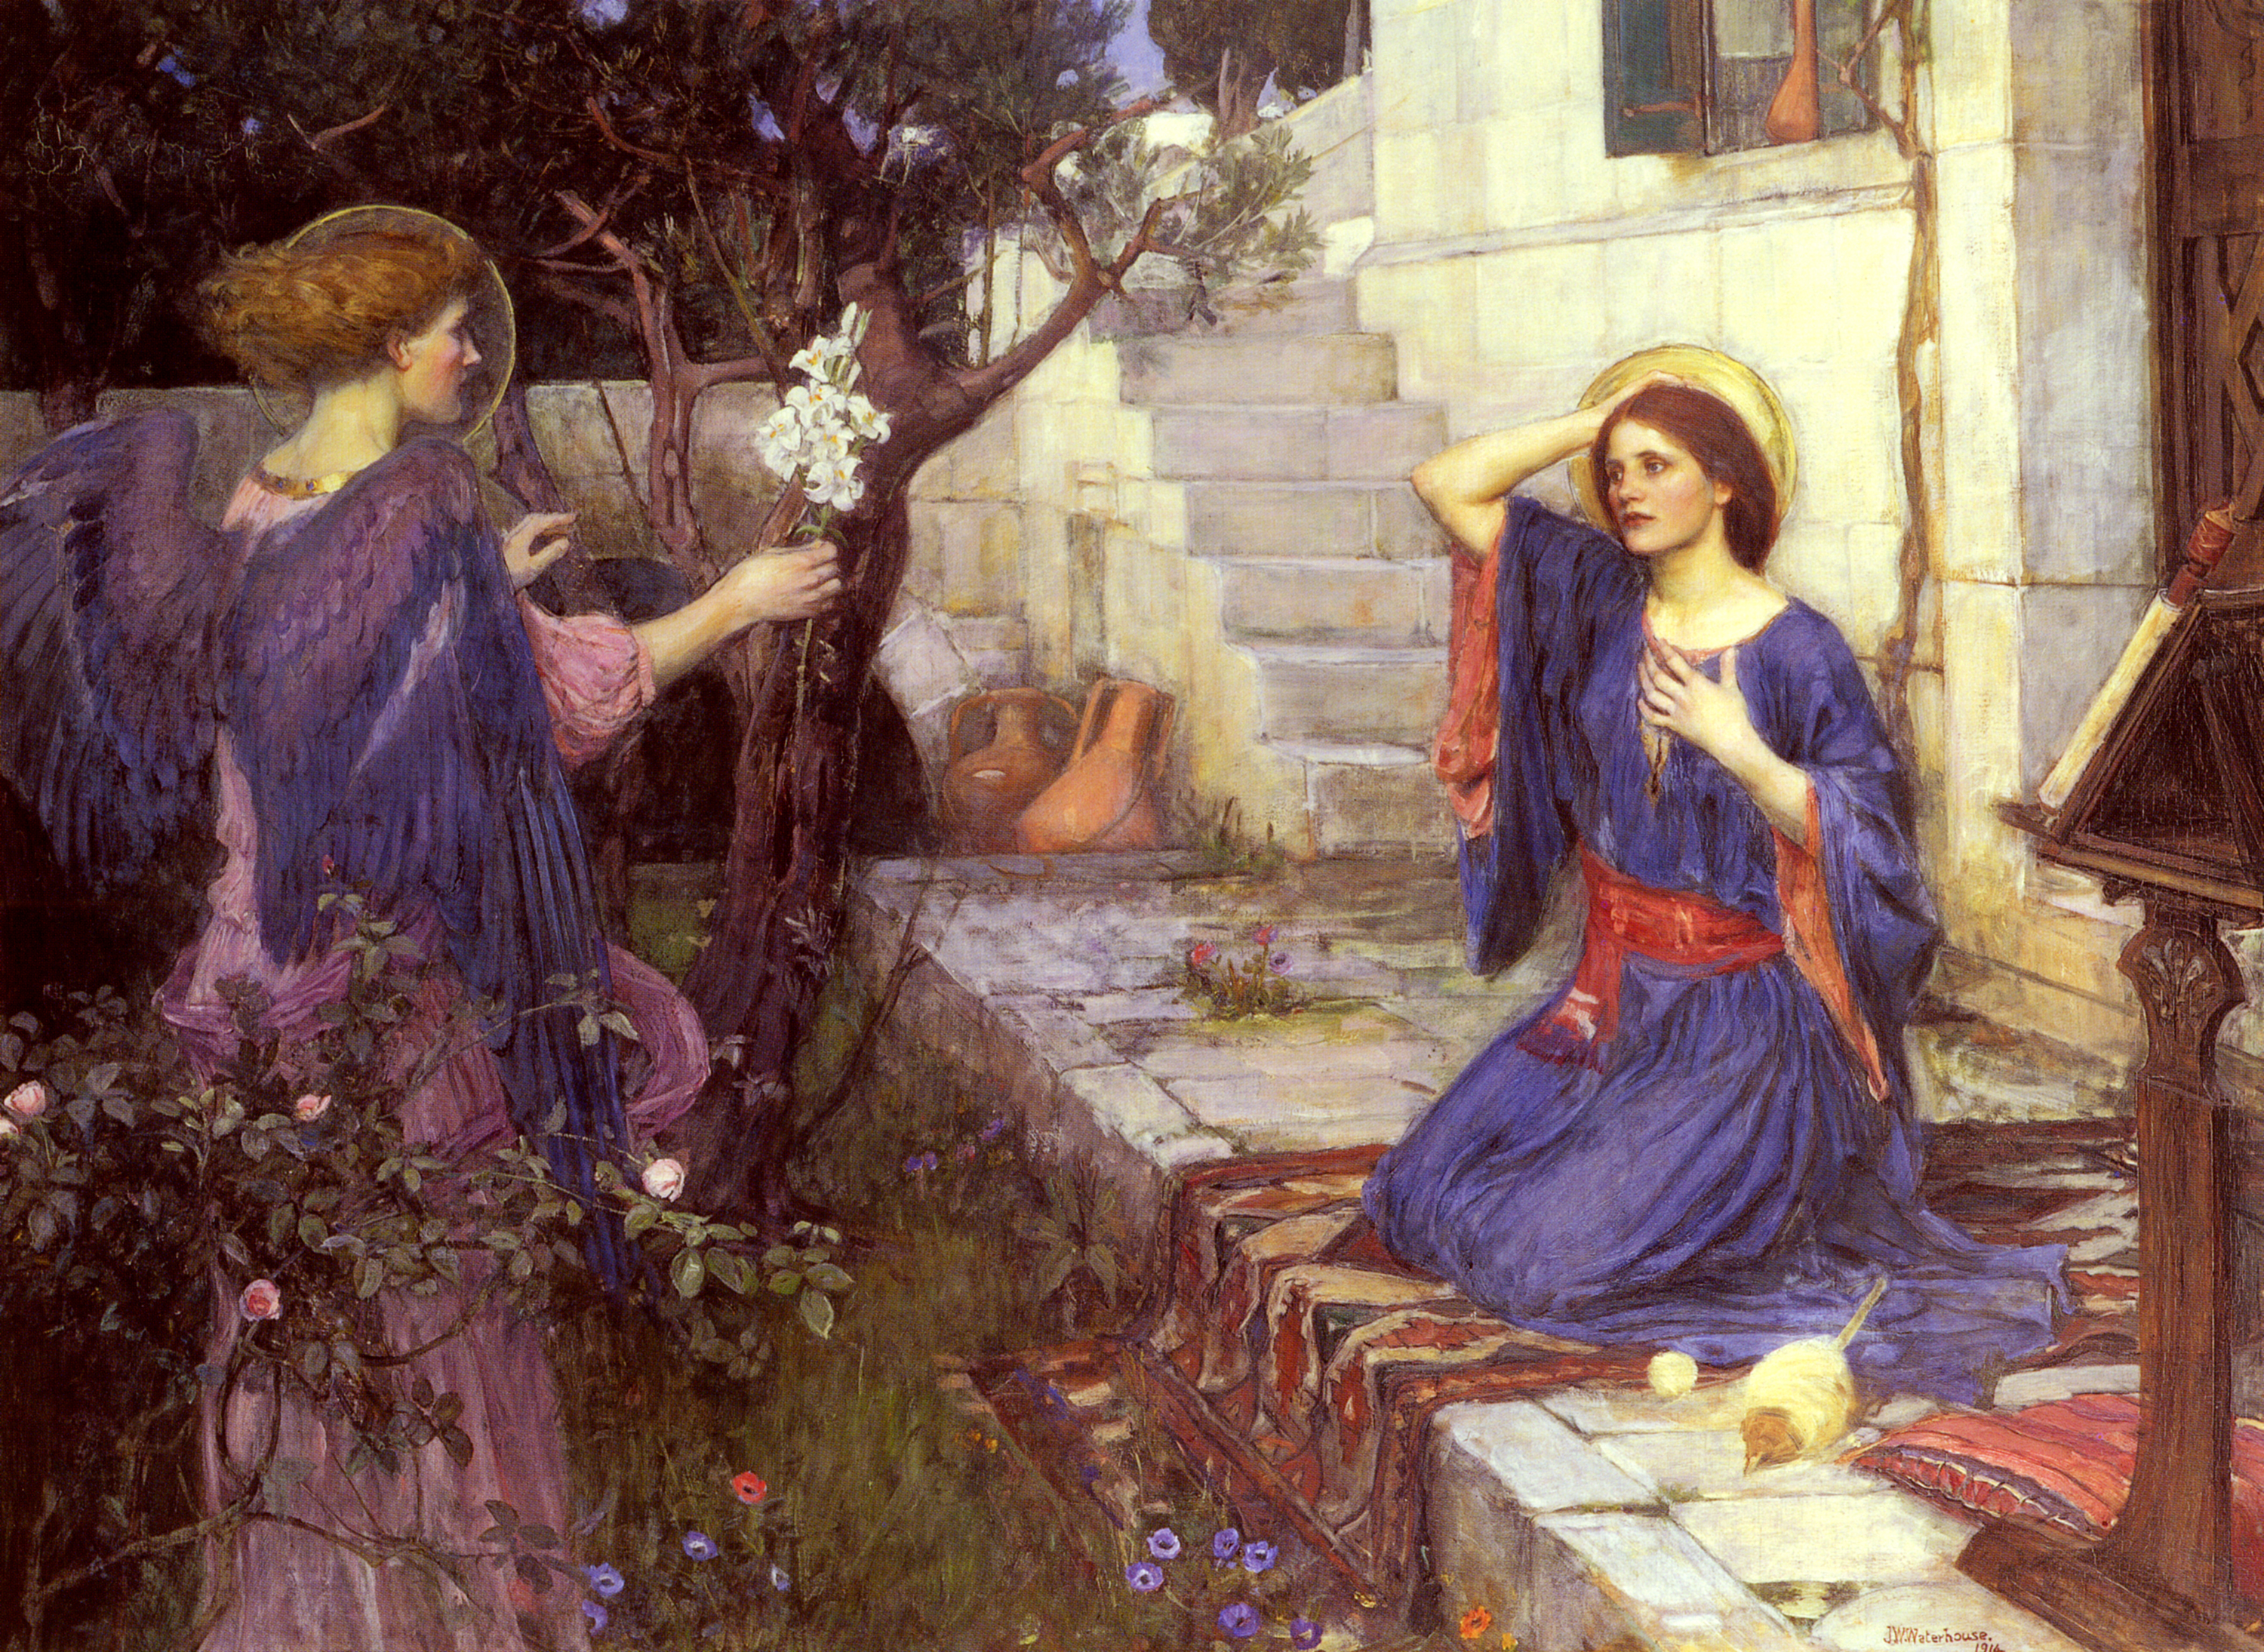 The angel Gabriel, dressed in light pink with purple wings, offers white lilies to the Virgin Mary, dressed in blue with red accents, during the Annunciation. Mary kneels on a patterned rug in a garden.